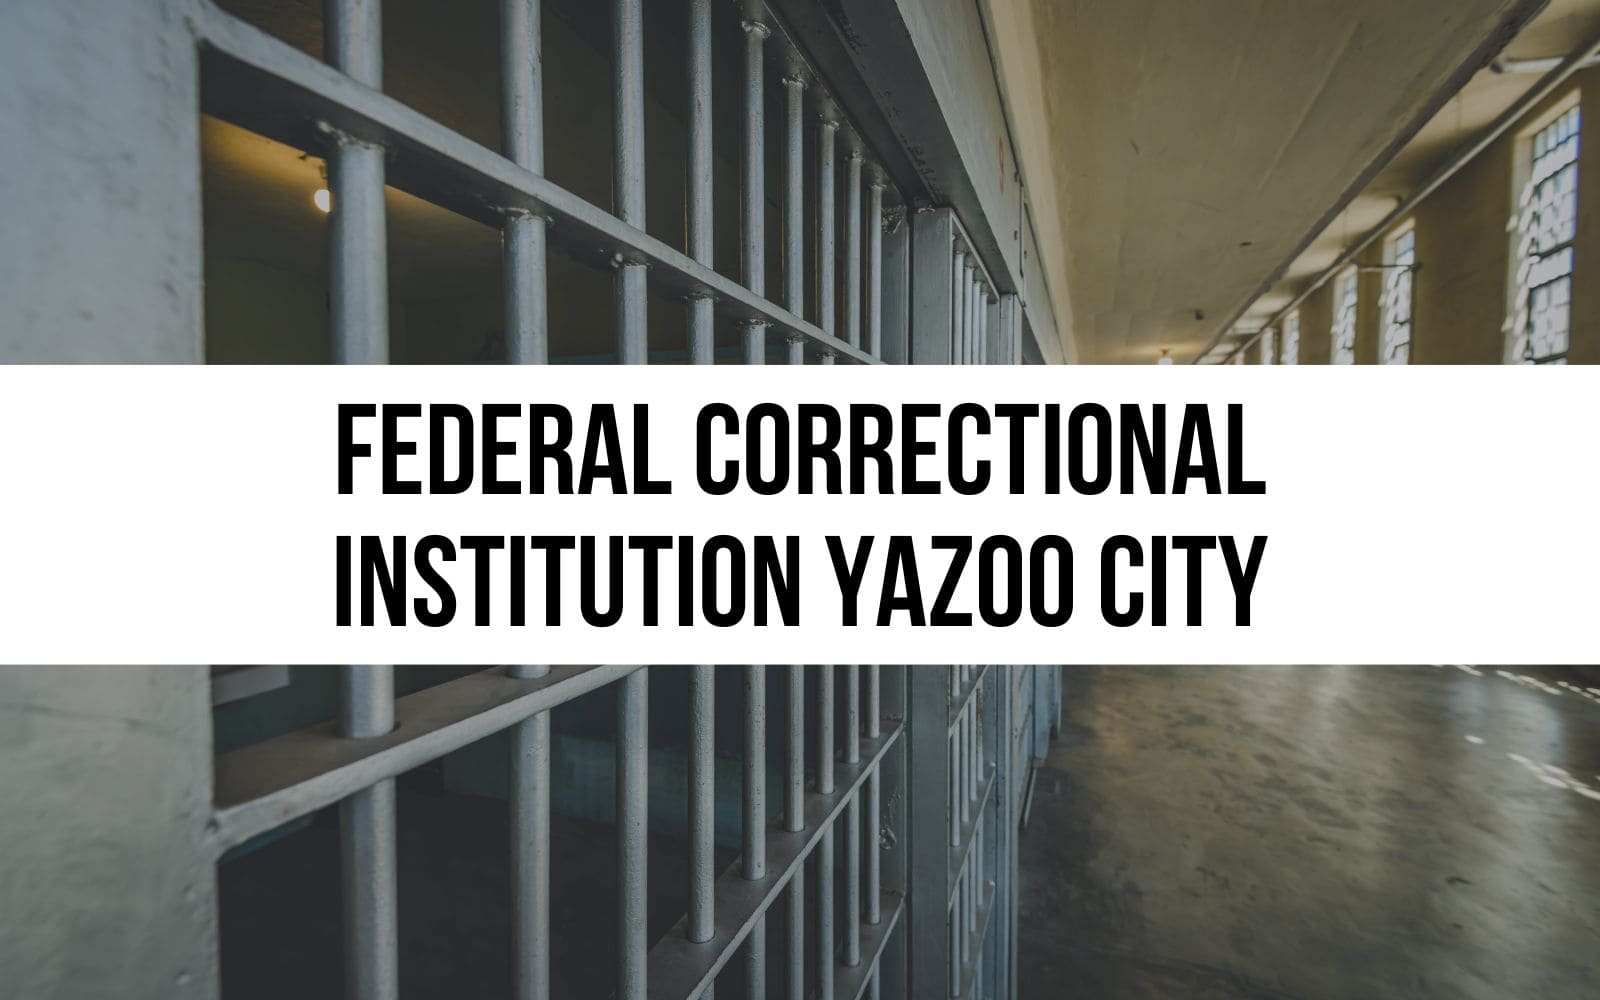 Federal Correctional Institution Yazoo City